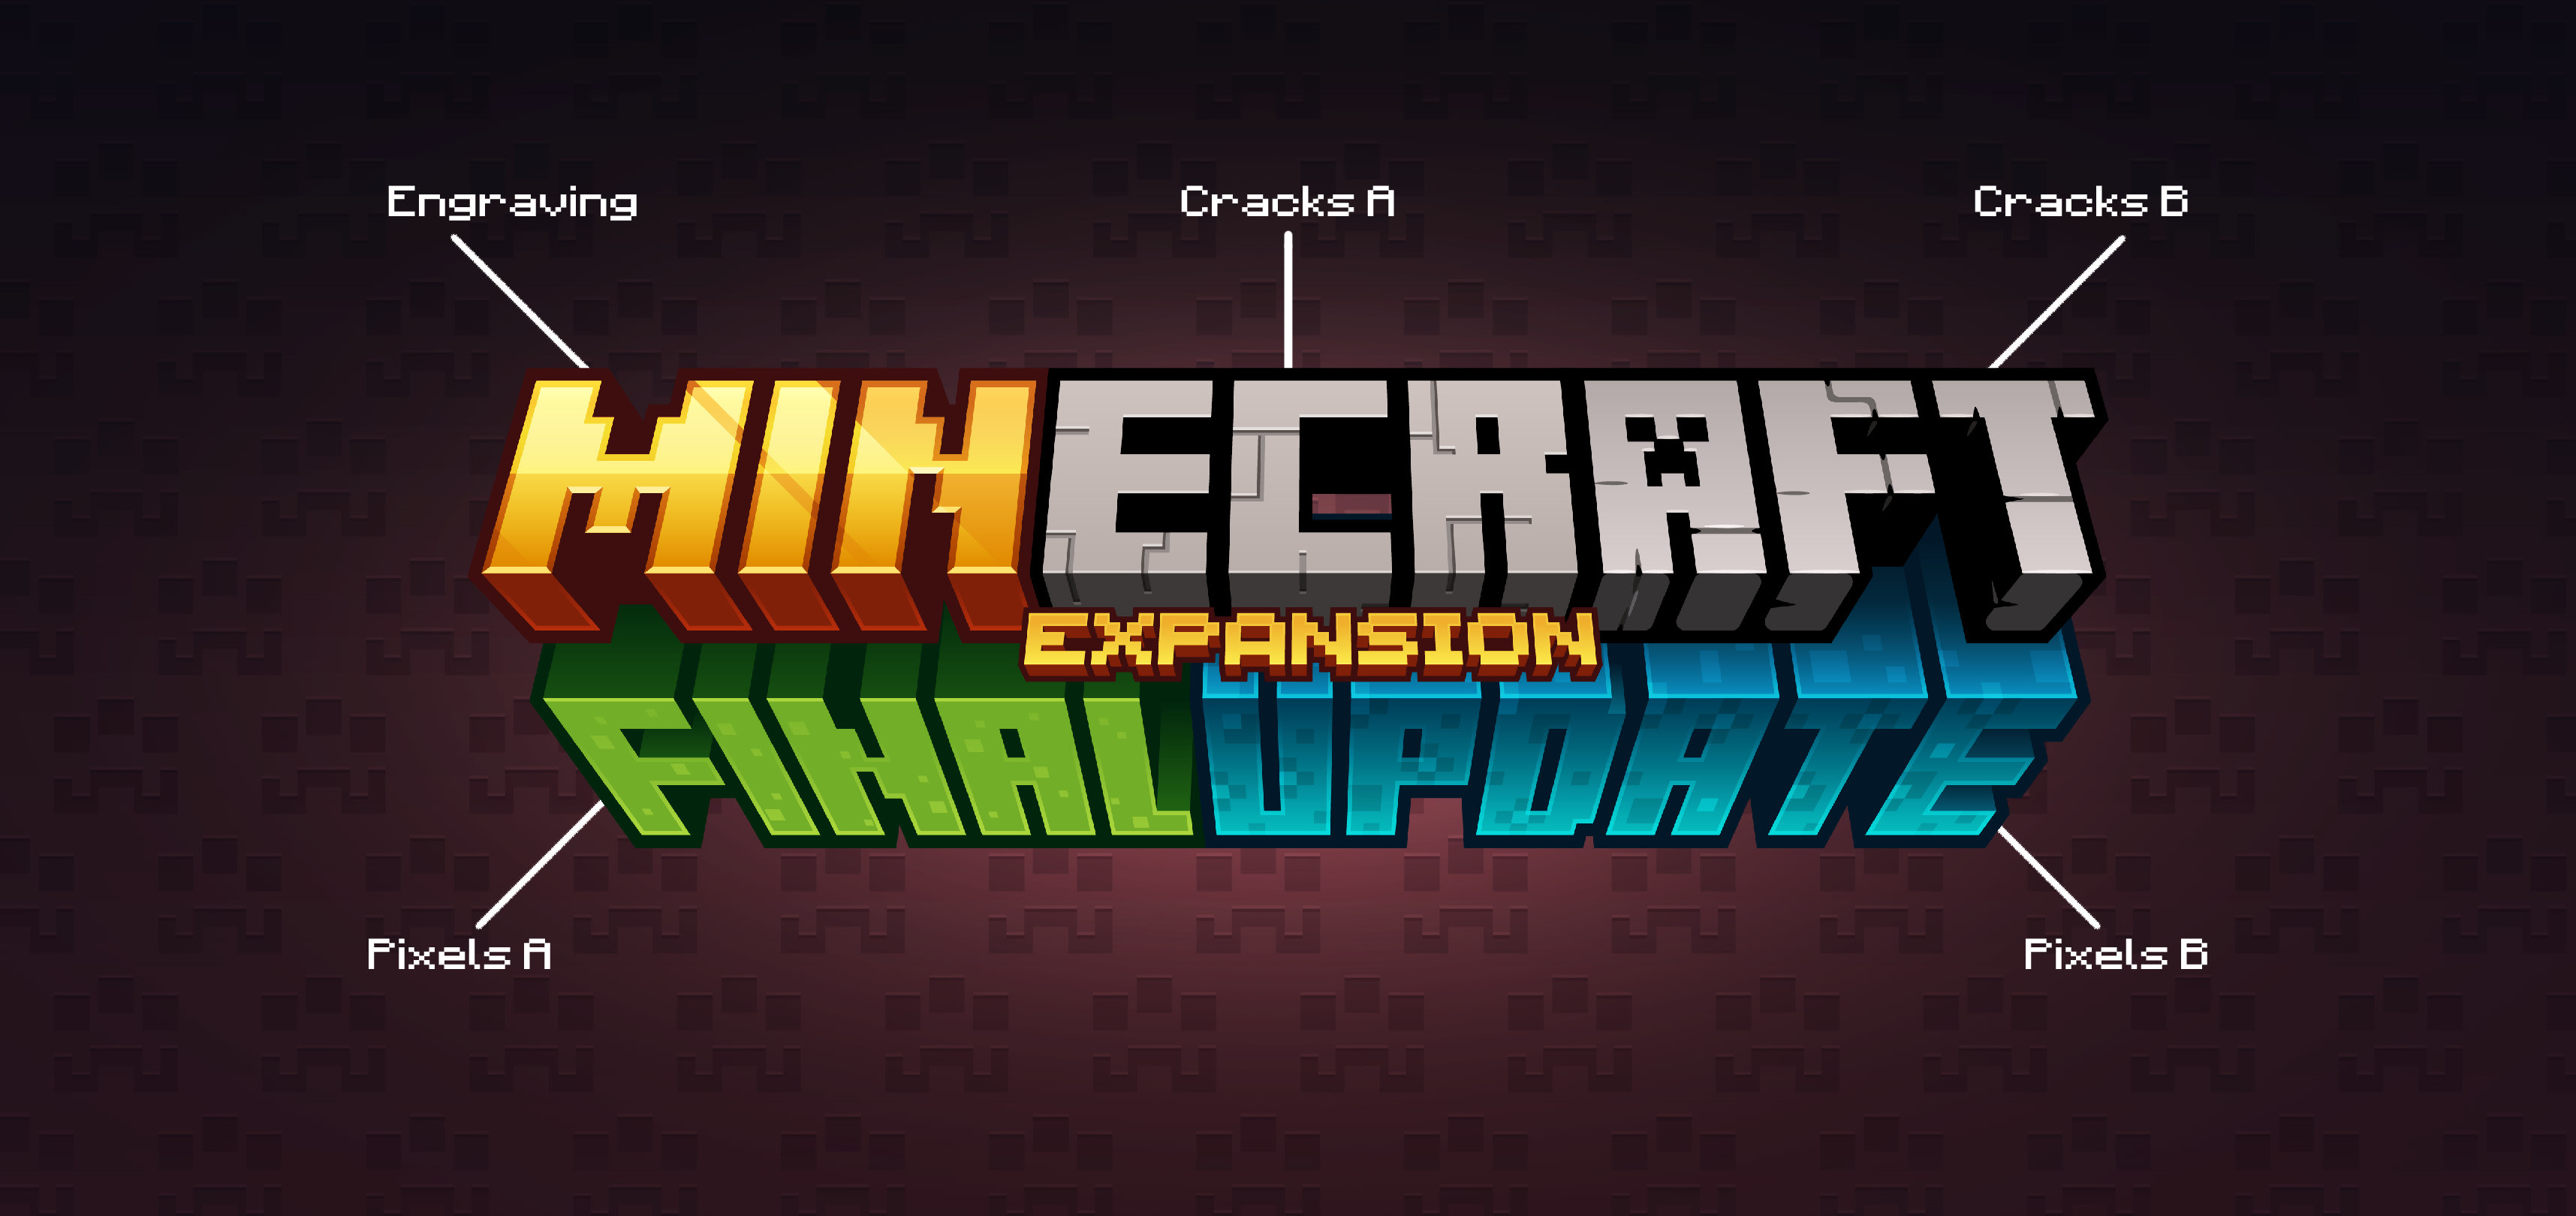 Top 99 text minecraft logo most viewed and downloaded